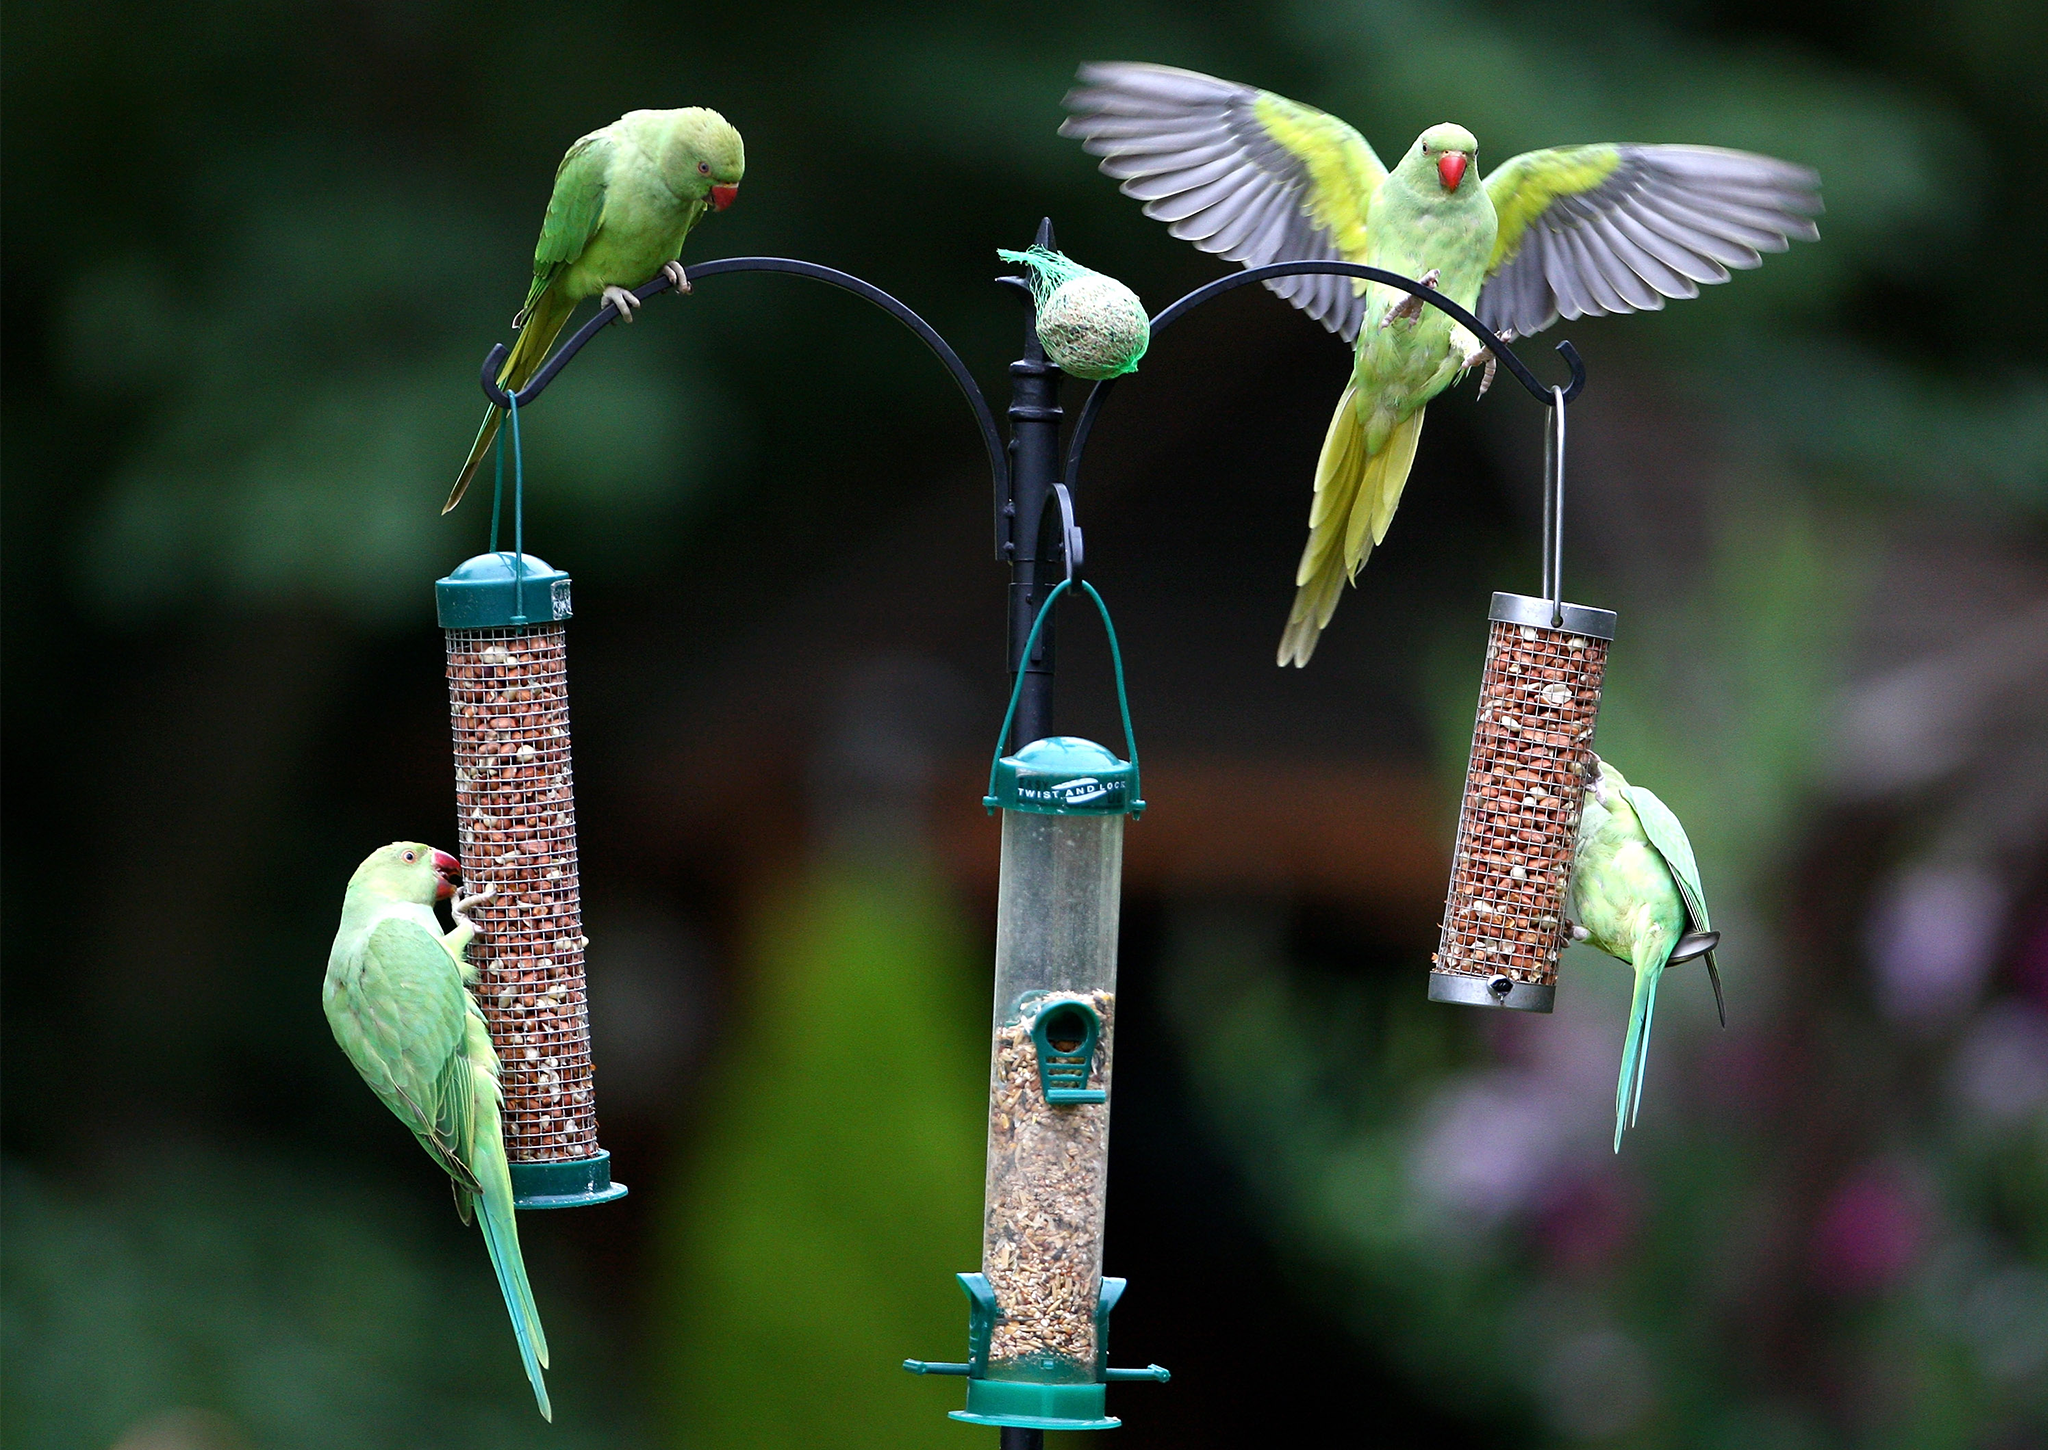 Parakeets feed from a bird feeder in a domestic back garden in Charshalton Beeches in London